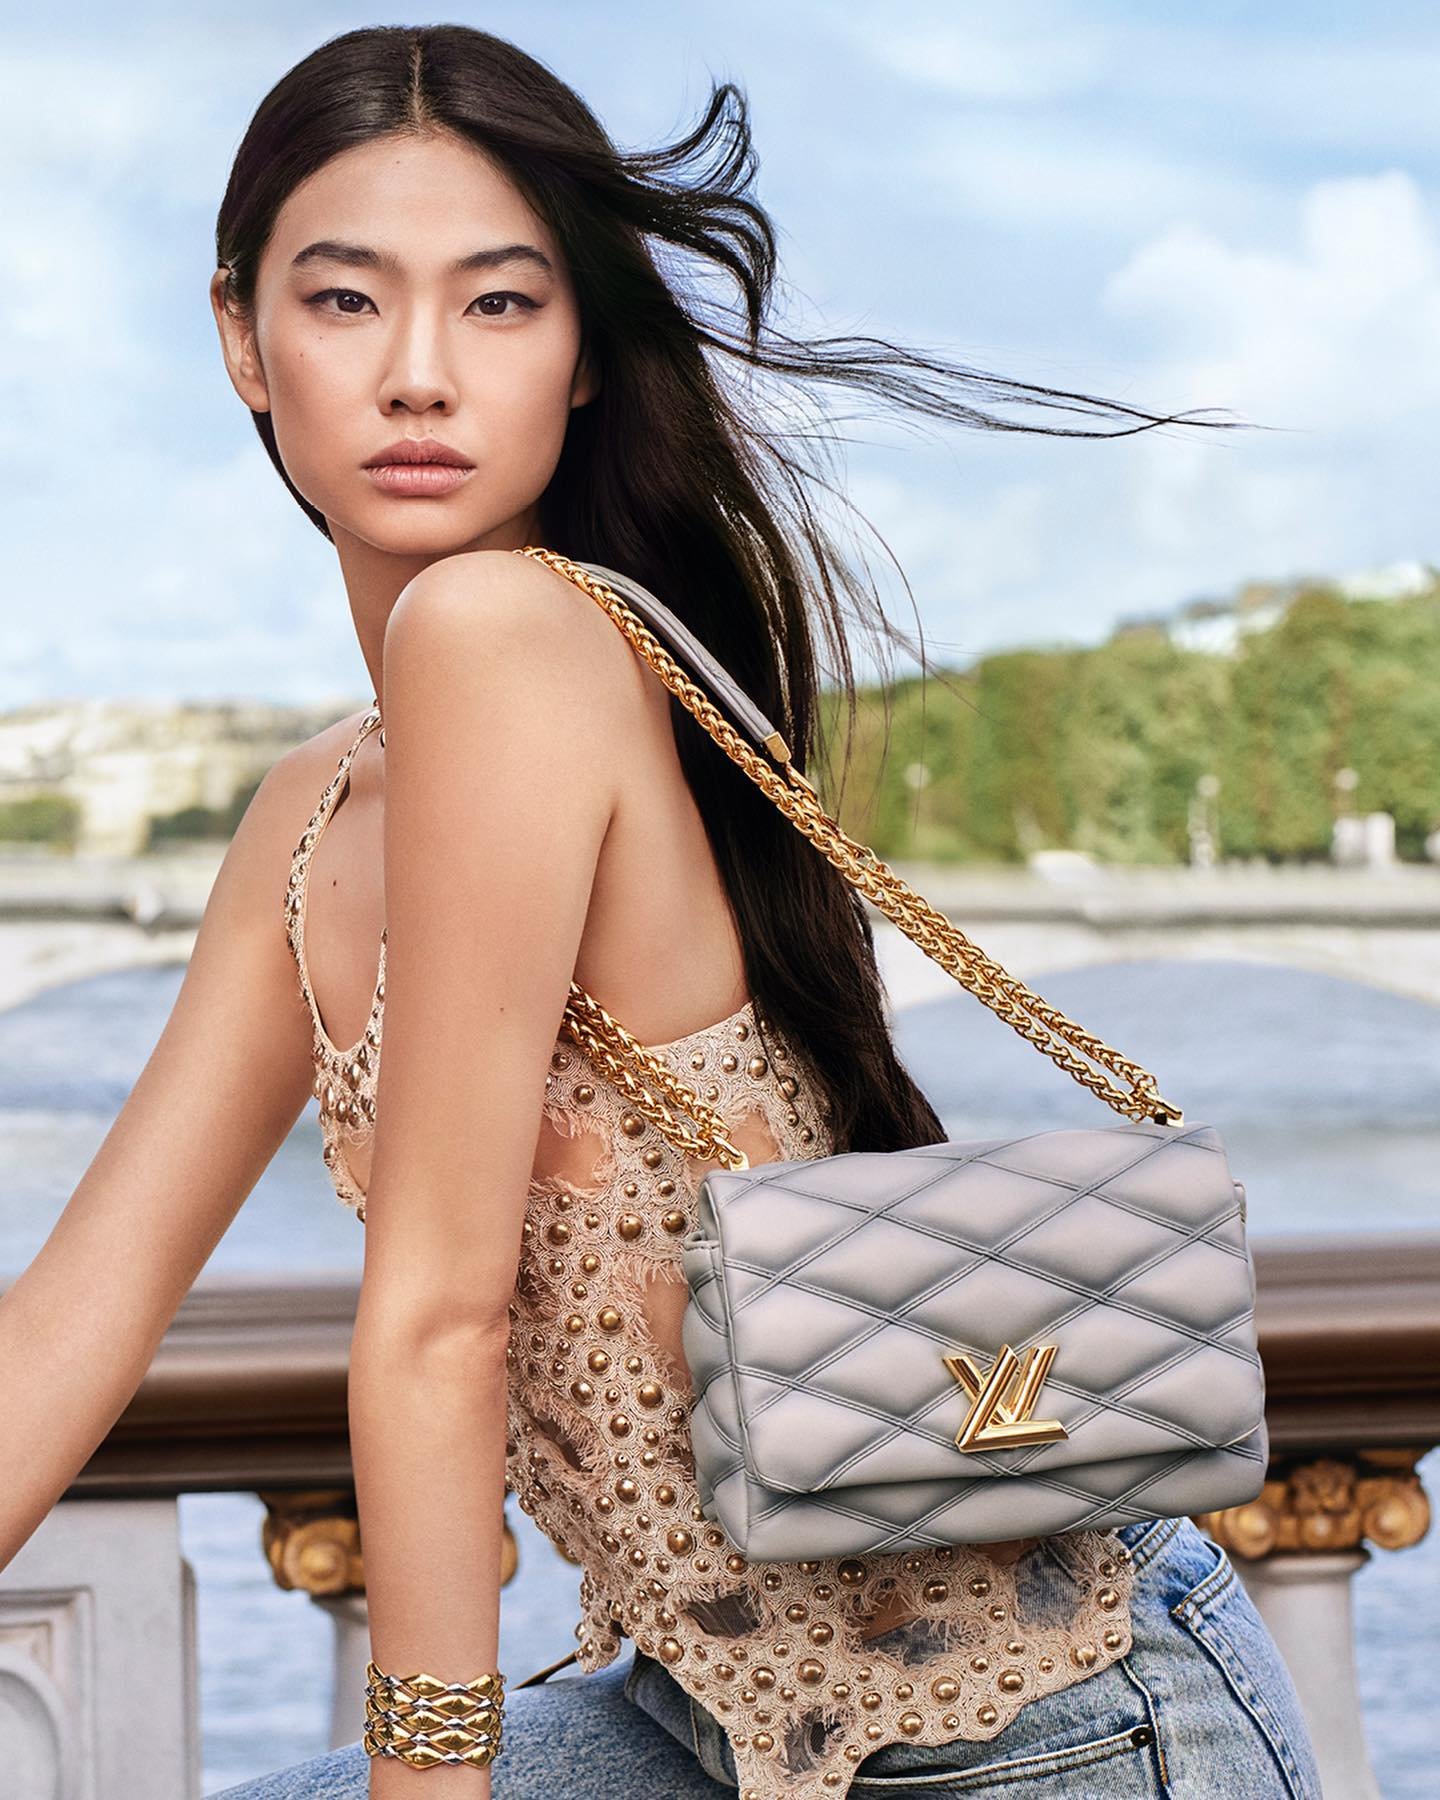 Louis-Vuitton-FW-2023-Campaign-by-Ethan-James-Green-16.jpg